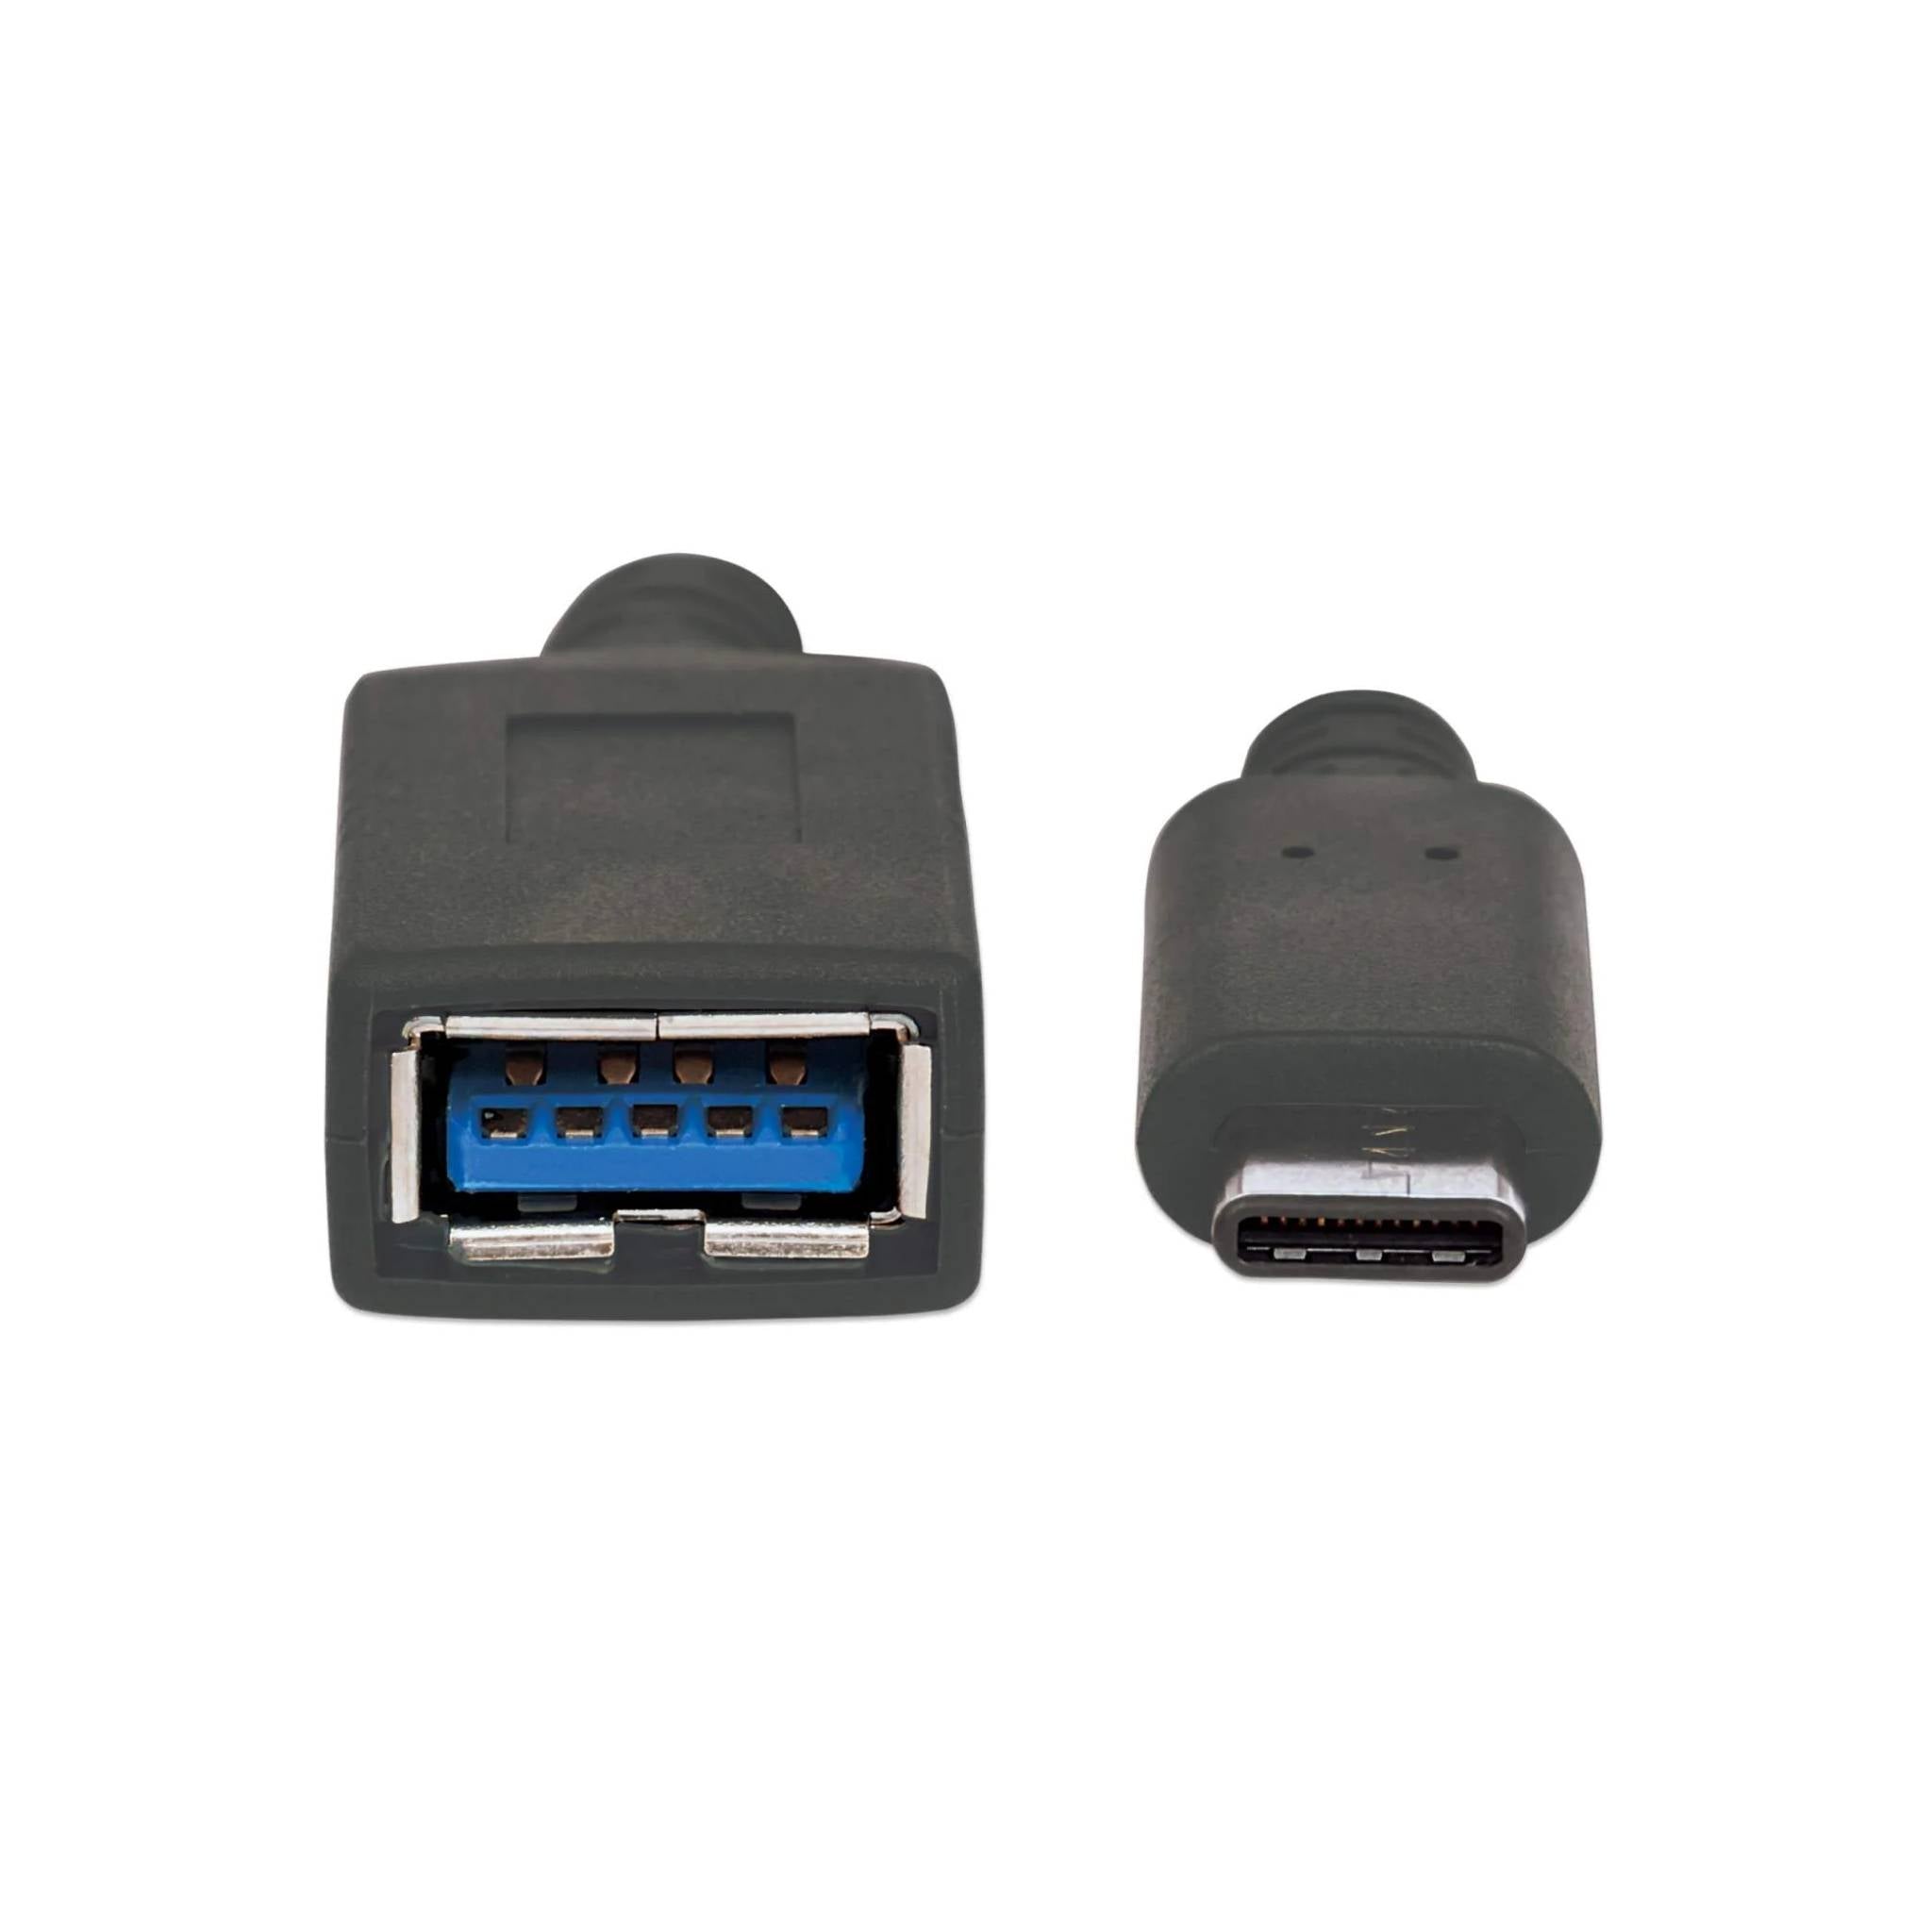 USB 3.2 Gen 1 Type-C Male to Type-A Female Adapter - High-Speed Data Transfer, USB-IF Certified, 6 Inches, Black